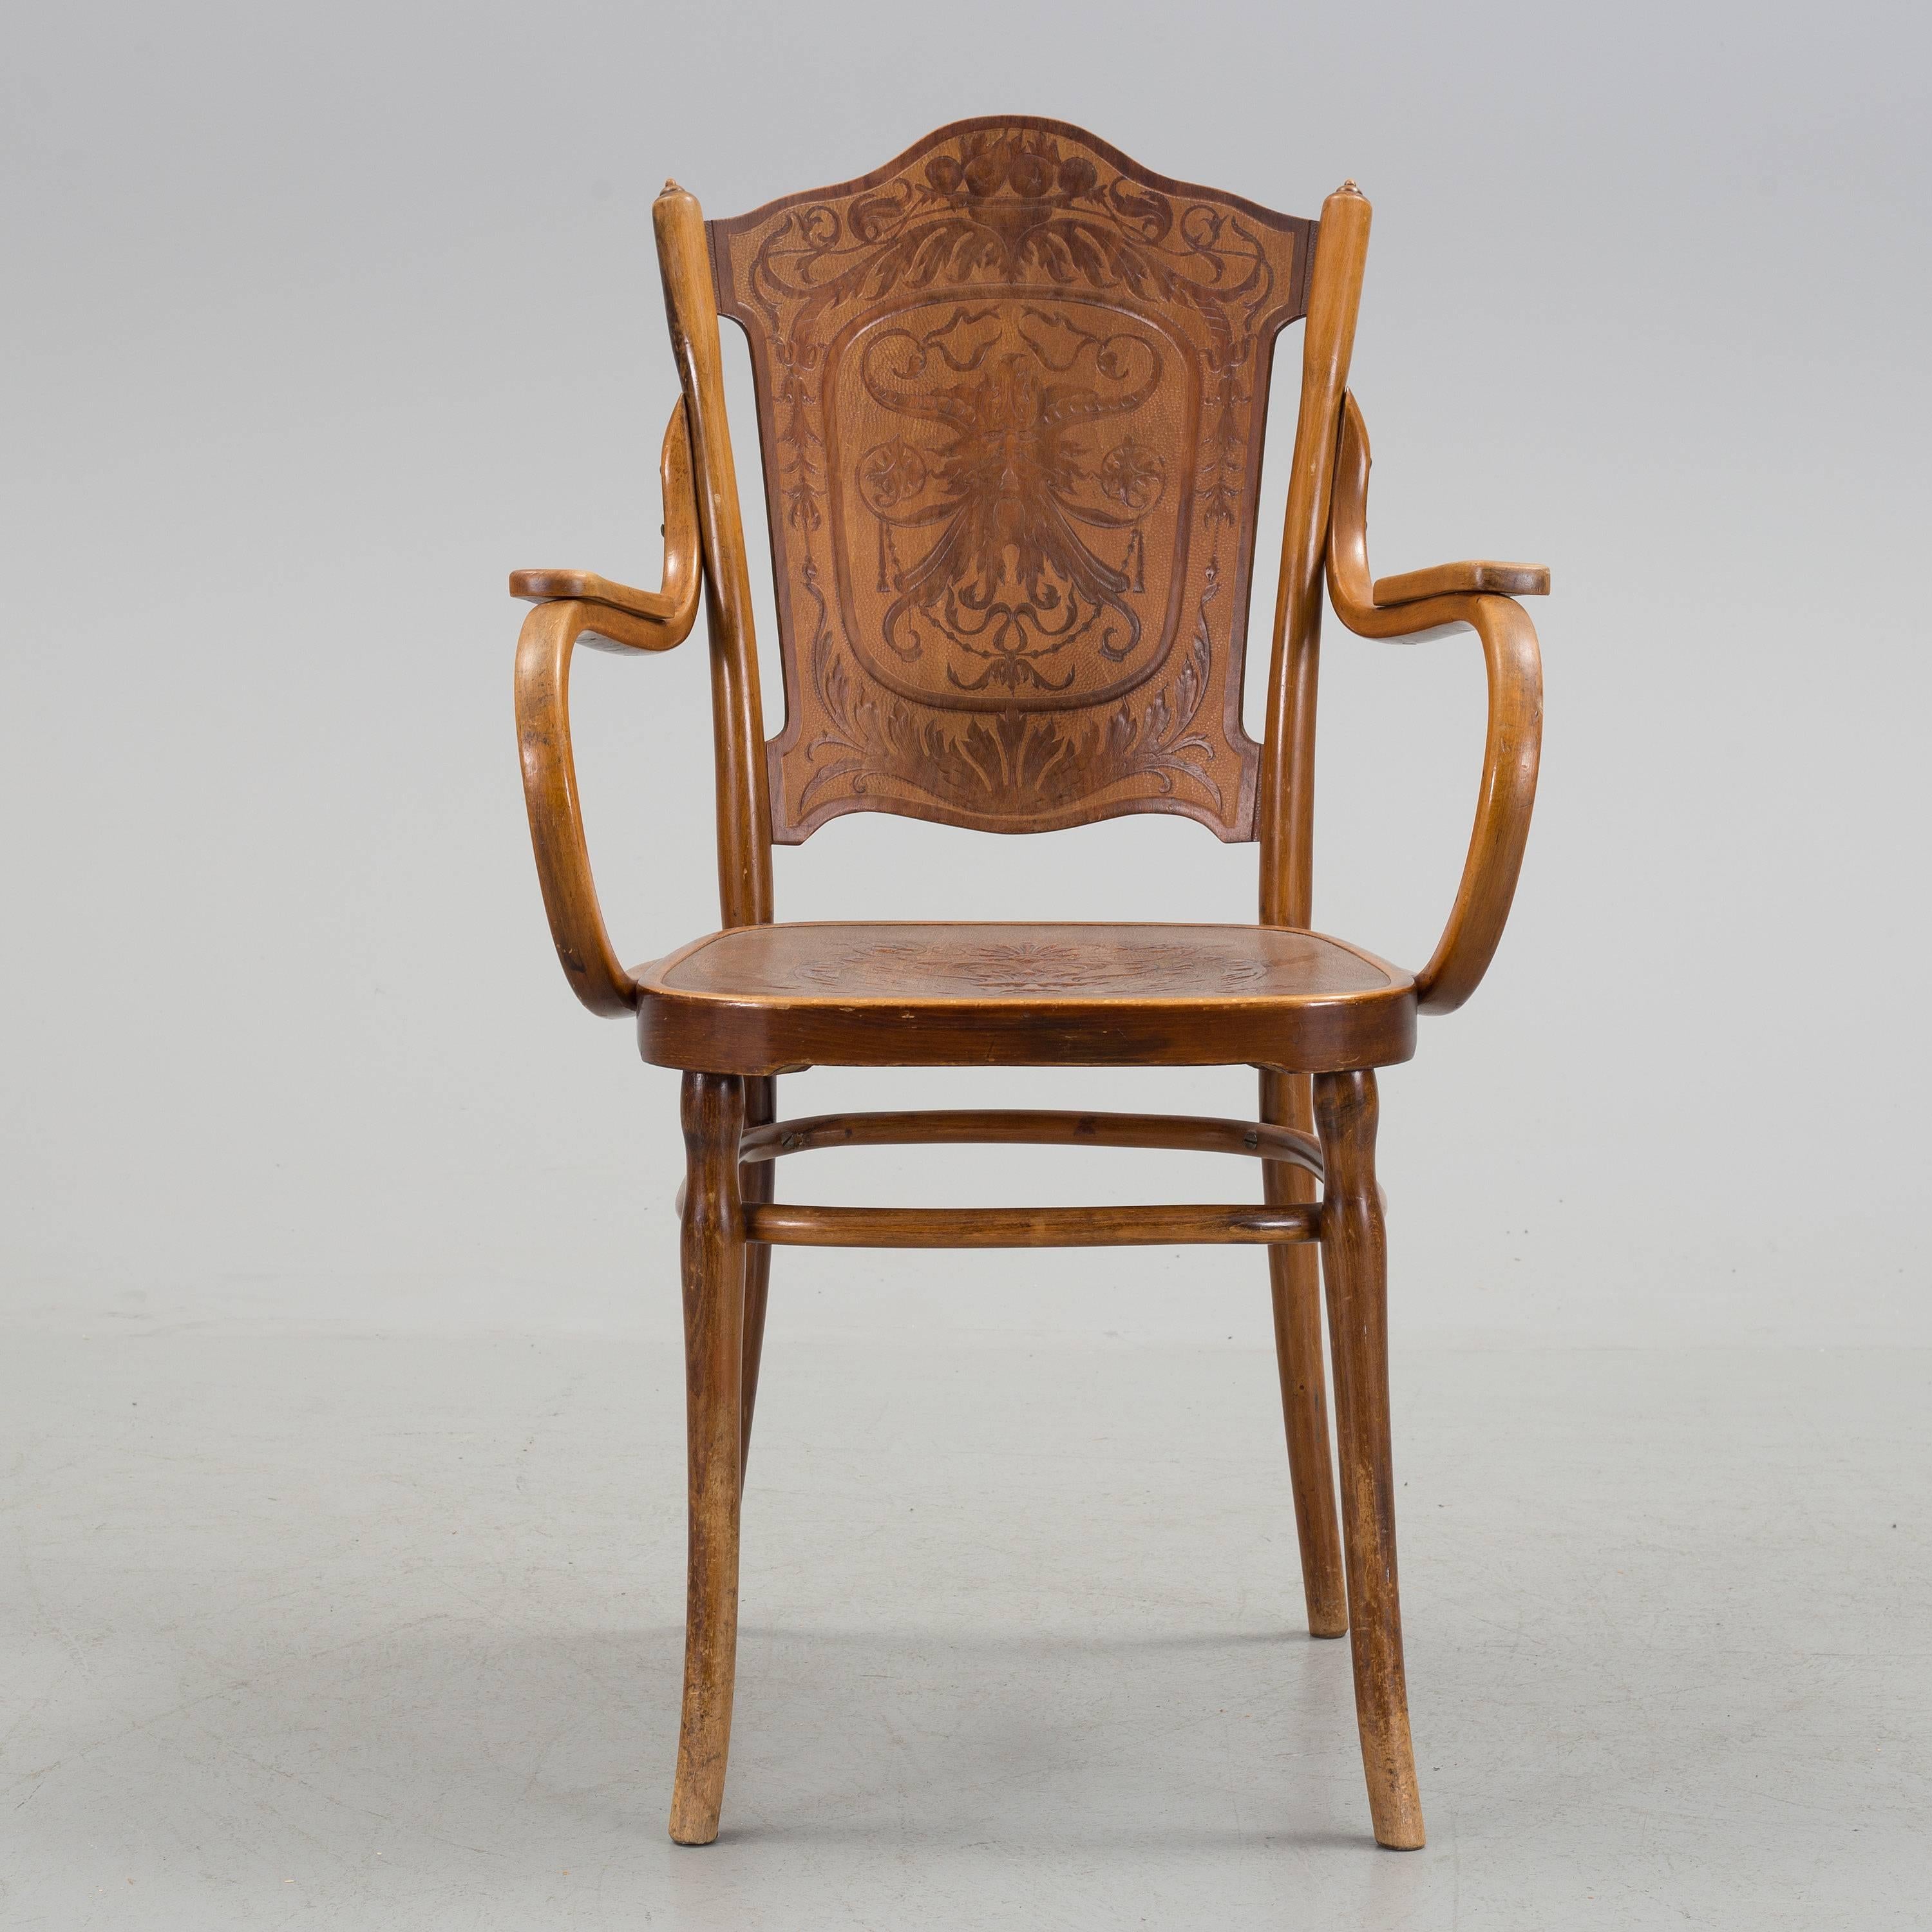 Beech bentwood frame with an embossed plywood seat and backrest. First time mentioned in the J. & J. Kohn catalog 1902 with the catalog no. 67. 
A beautiful original condition.
A suitable bench also available.